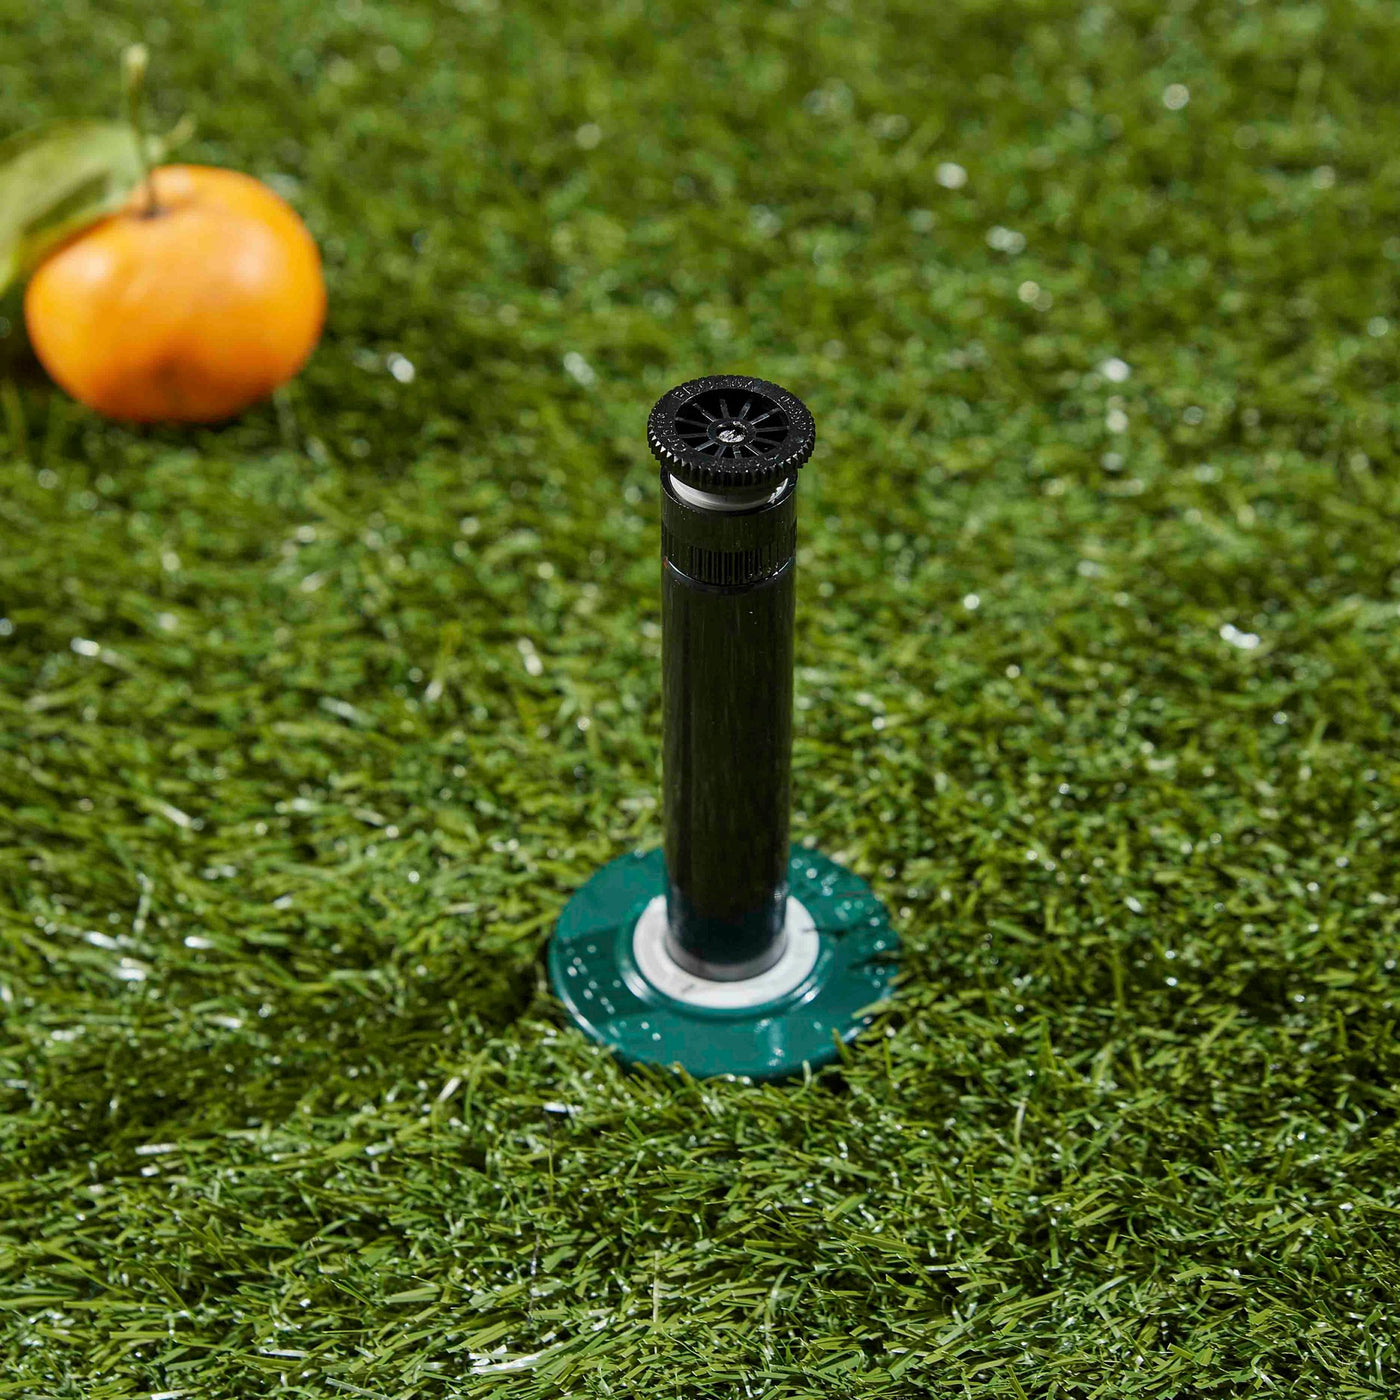 Extended riser stem on a professional hard top pop-up spray head sprinkler with adjustable nozzle. 